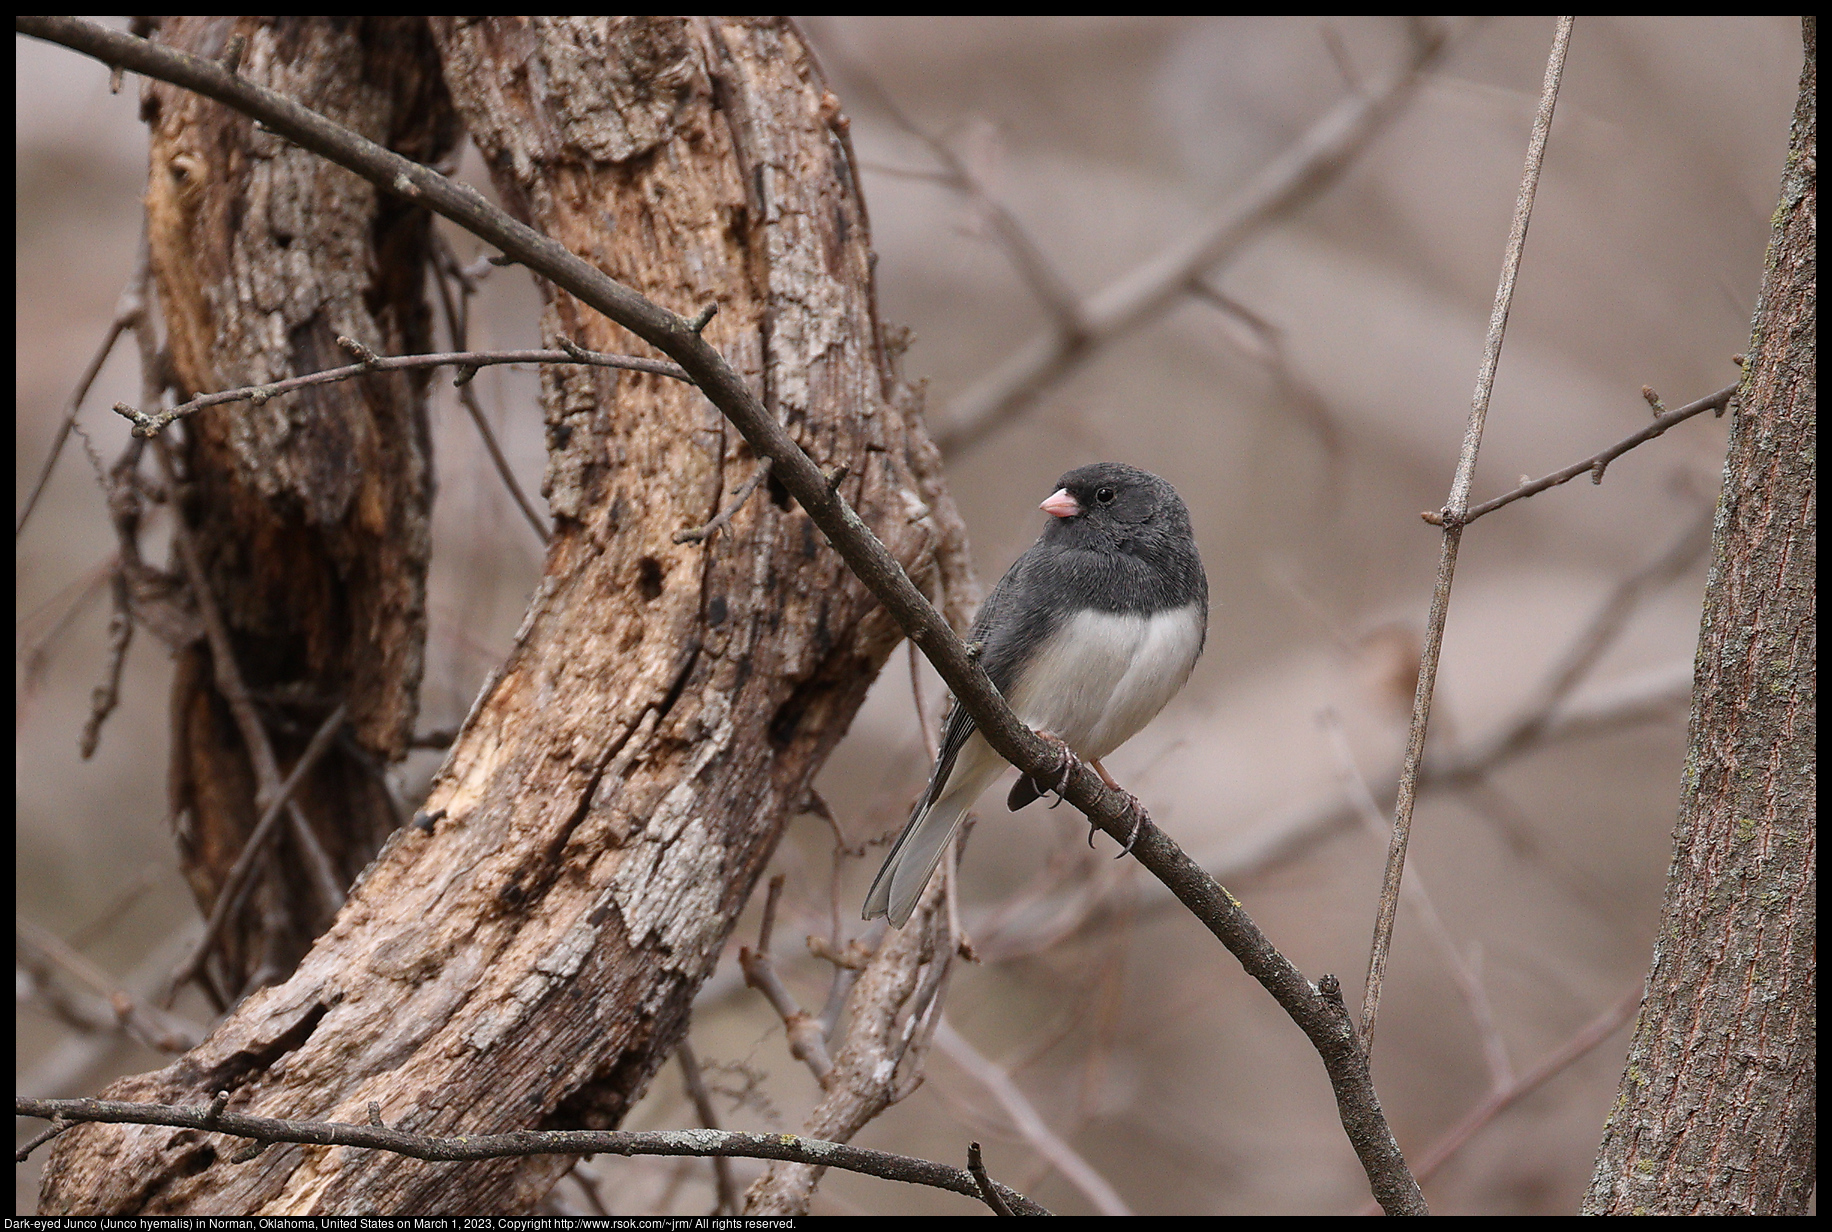 Dark-eyed Junco (Junco hyemalis) in Norman, Oklahoma, United States on March 1, 2023